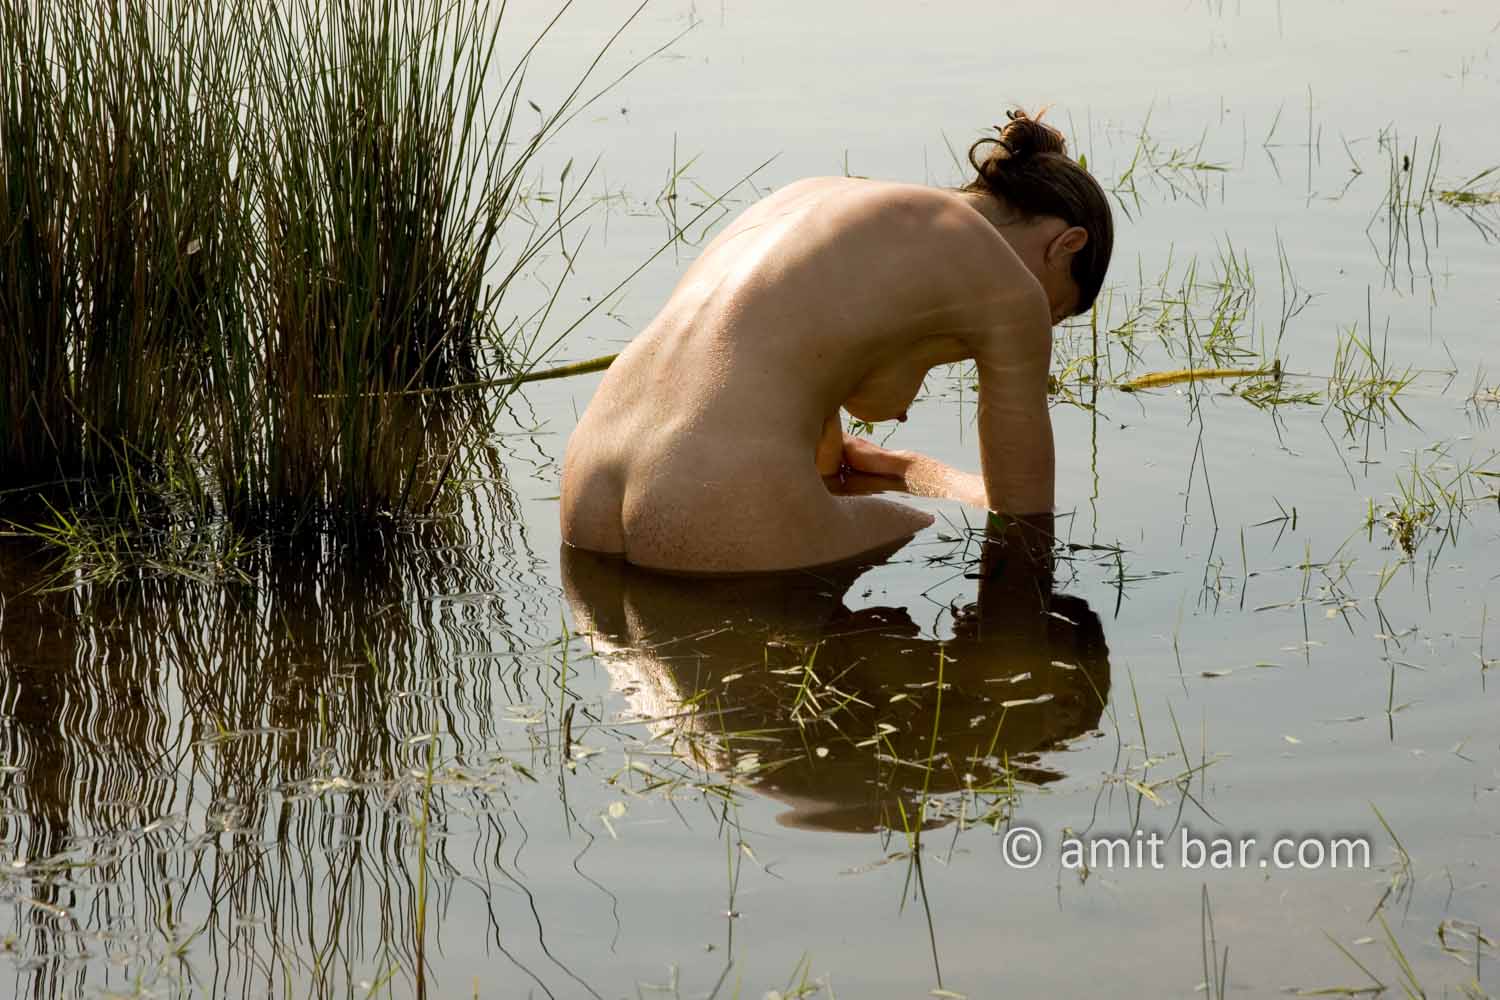 Nude in water. Nude model in shallow water